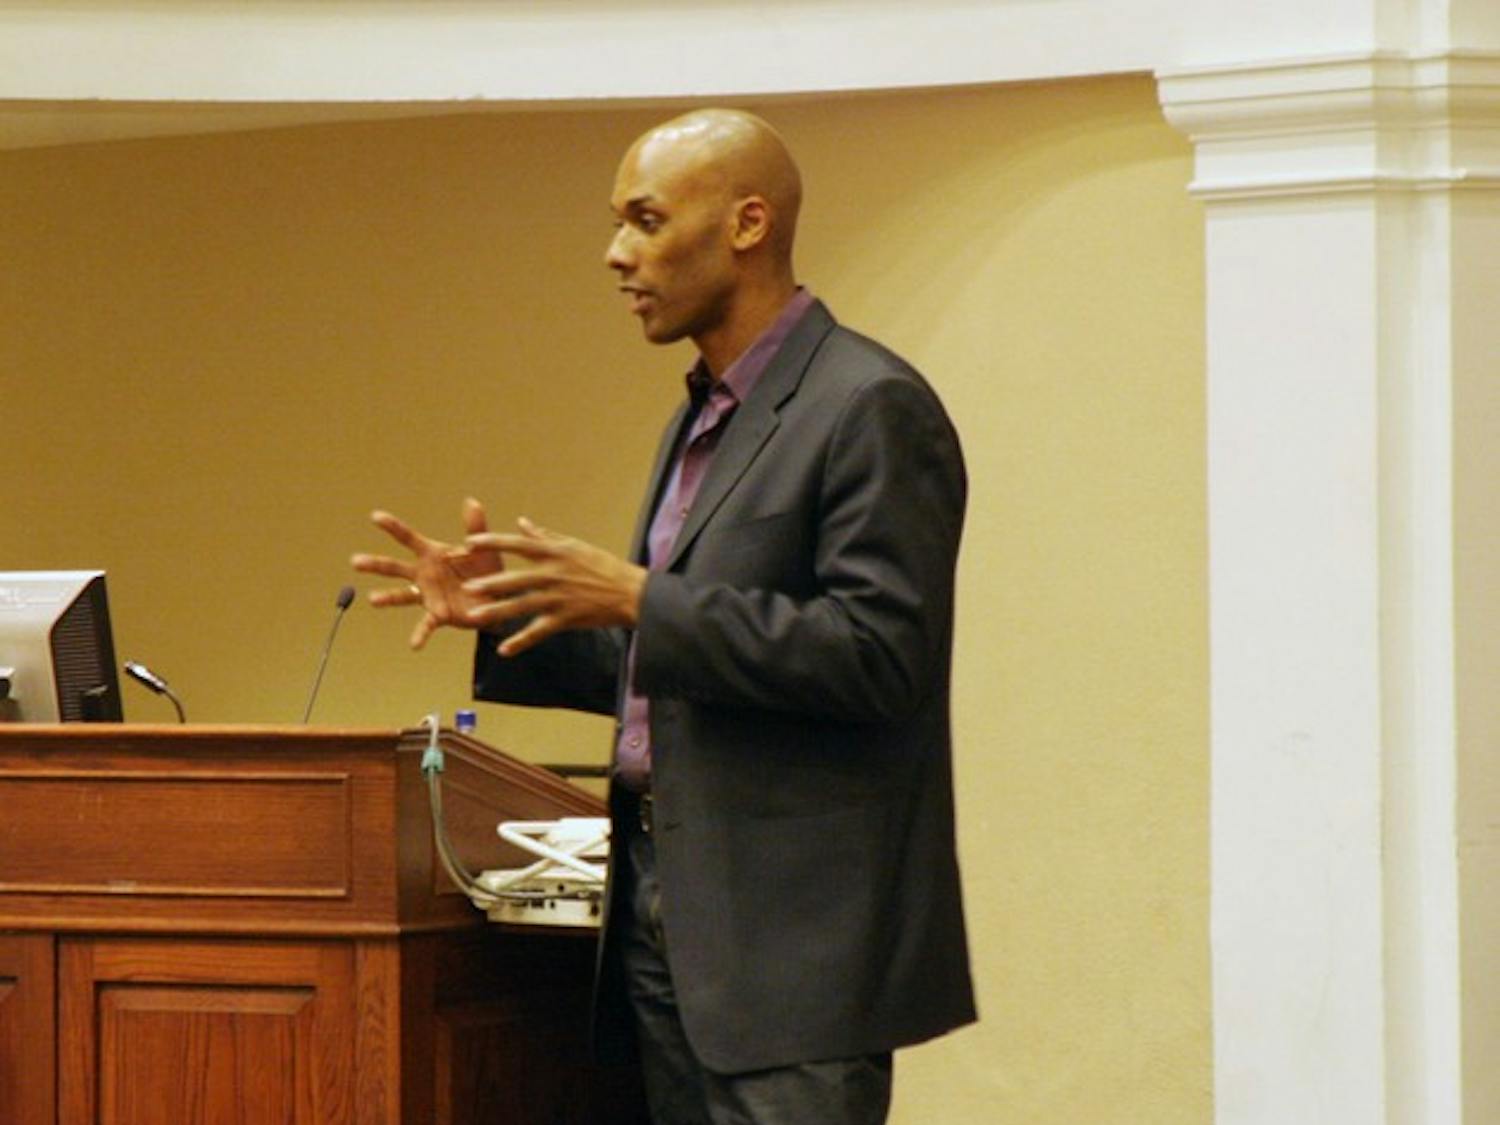 Former Editor-in-Chief of The Dartmouth Keith Boykin '87 spoke about 